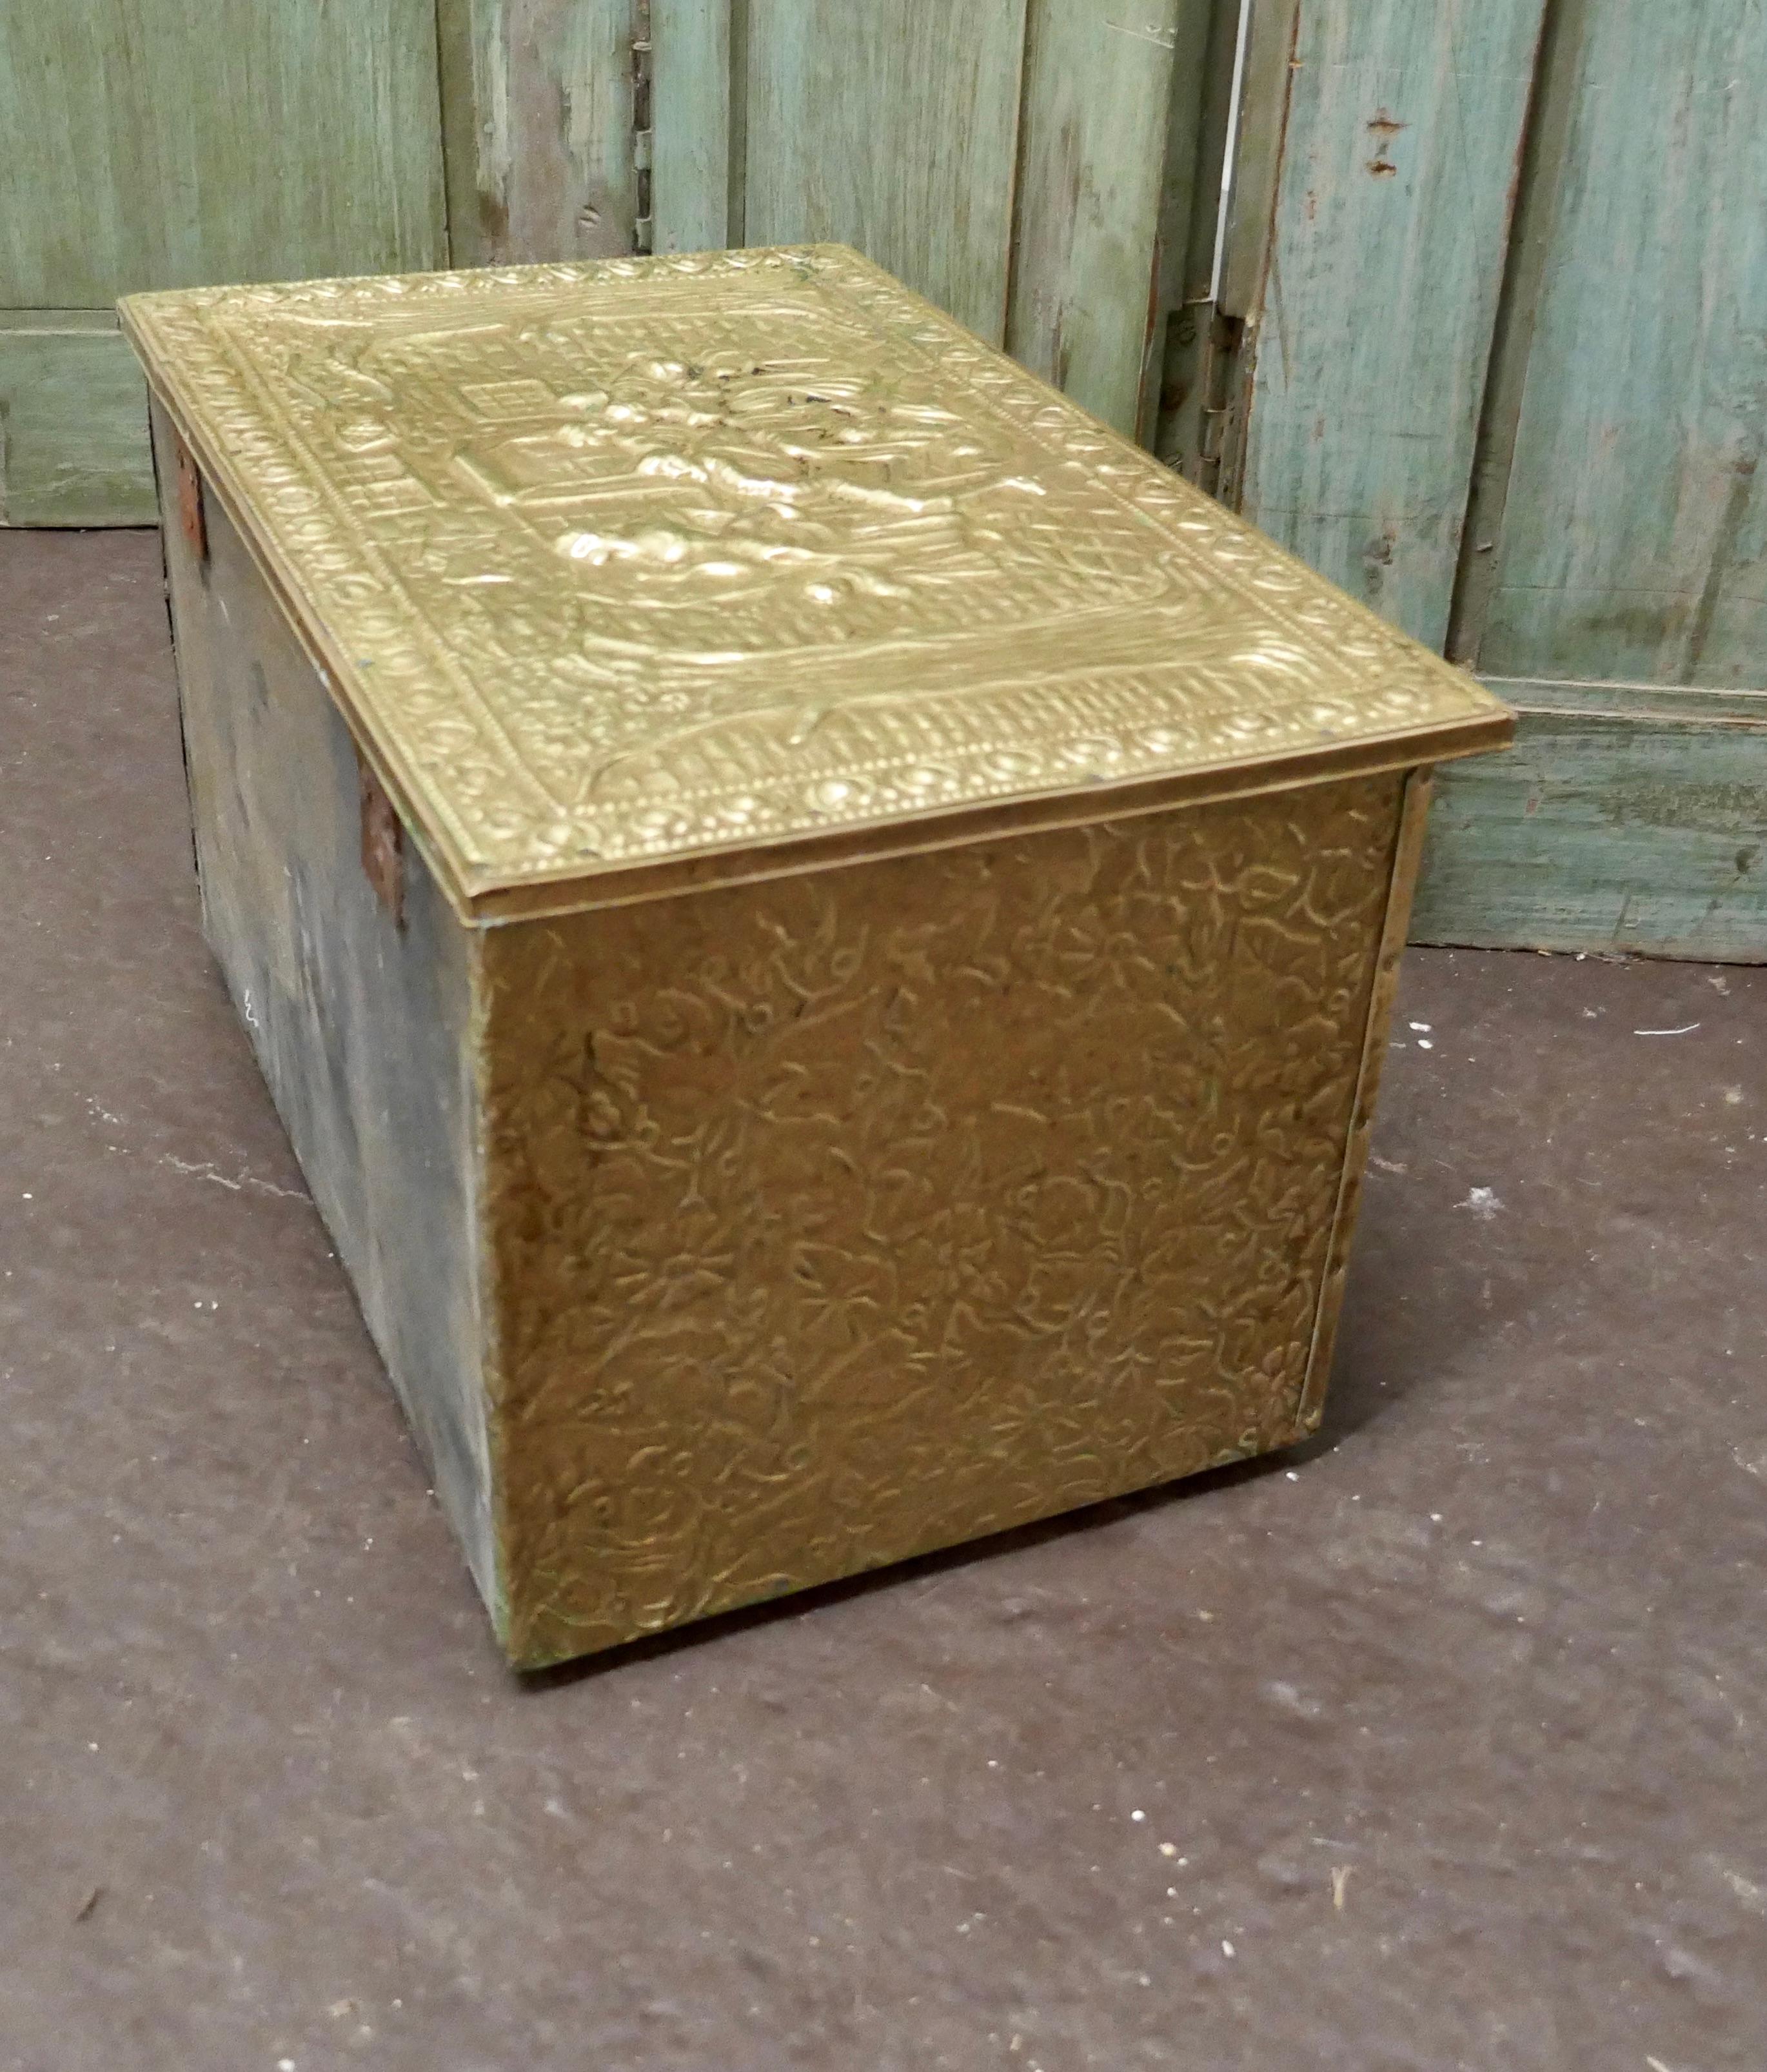 Country Embossed Brass Log or Coal Box, or Slipper Box with Tavern Scenes